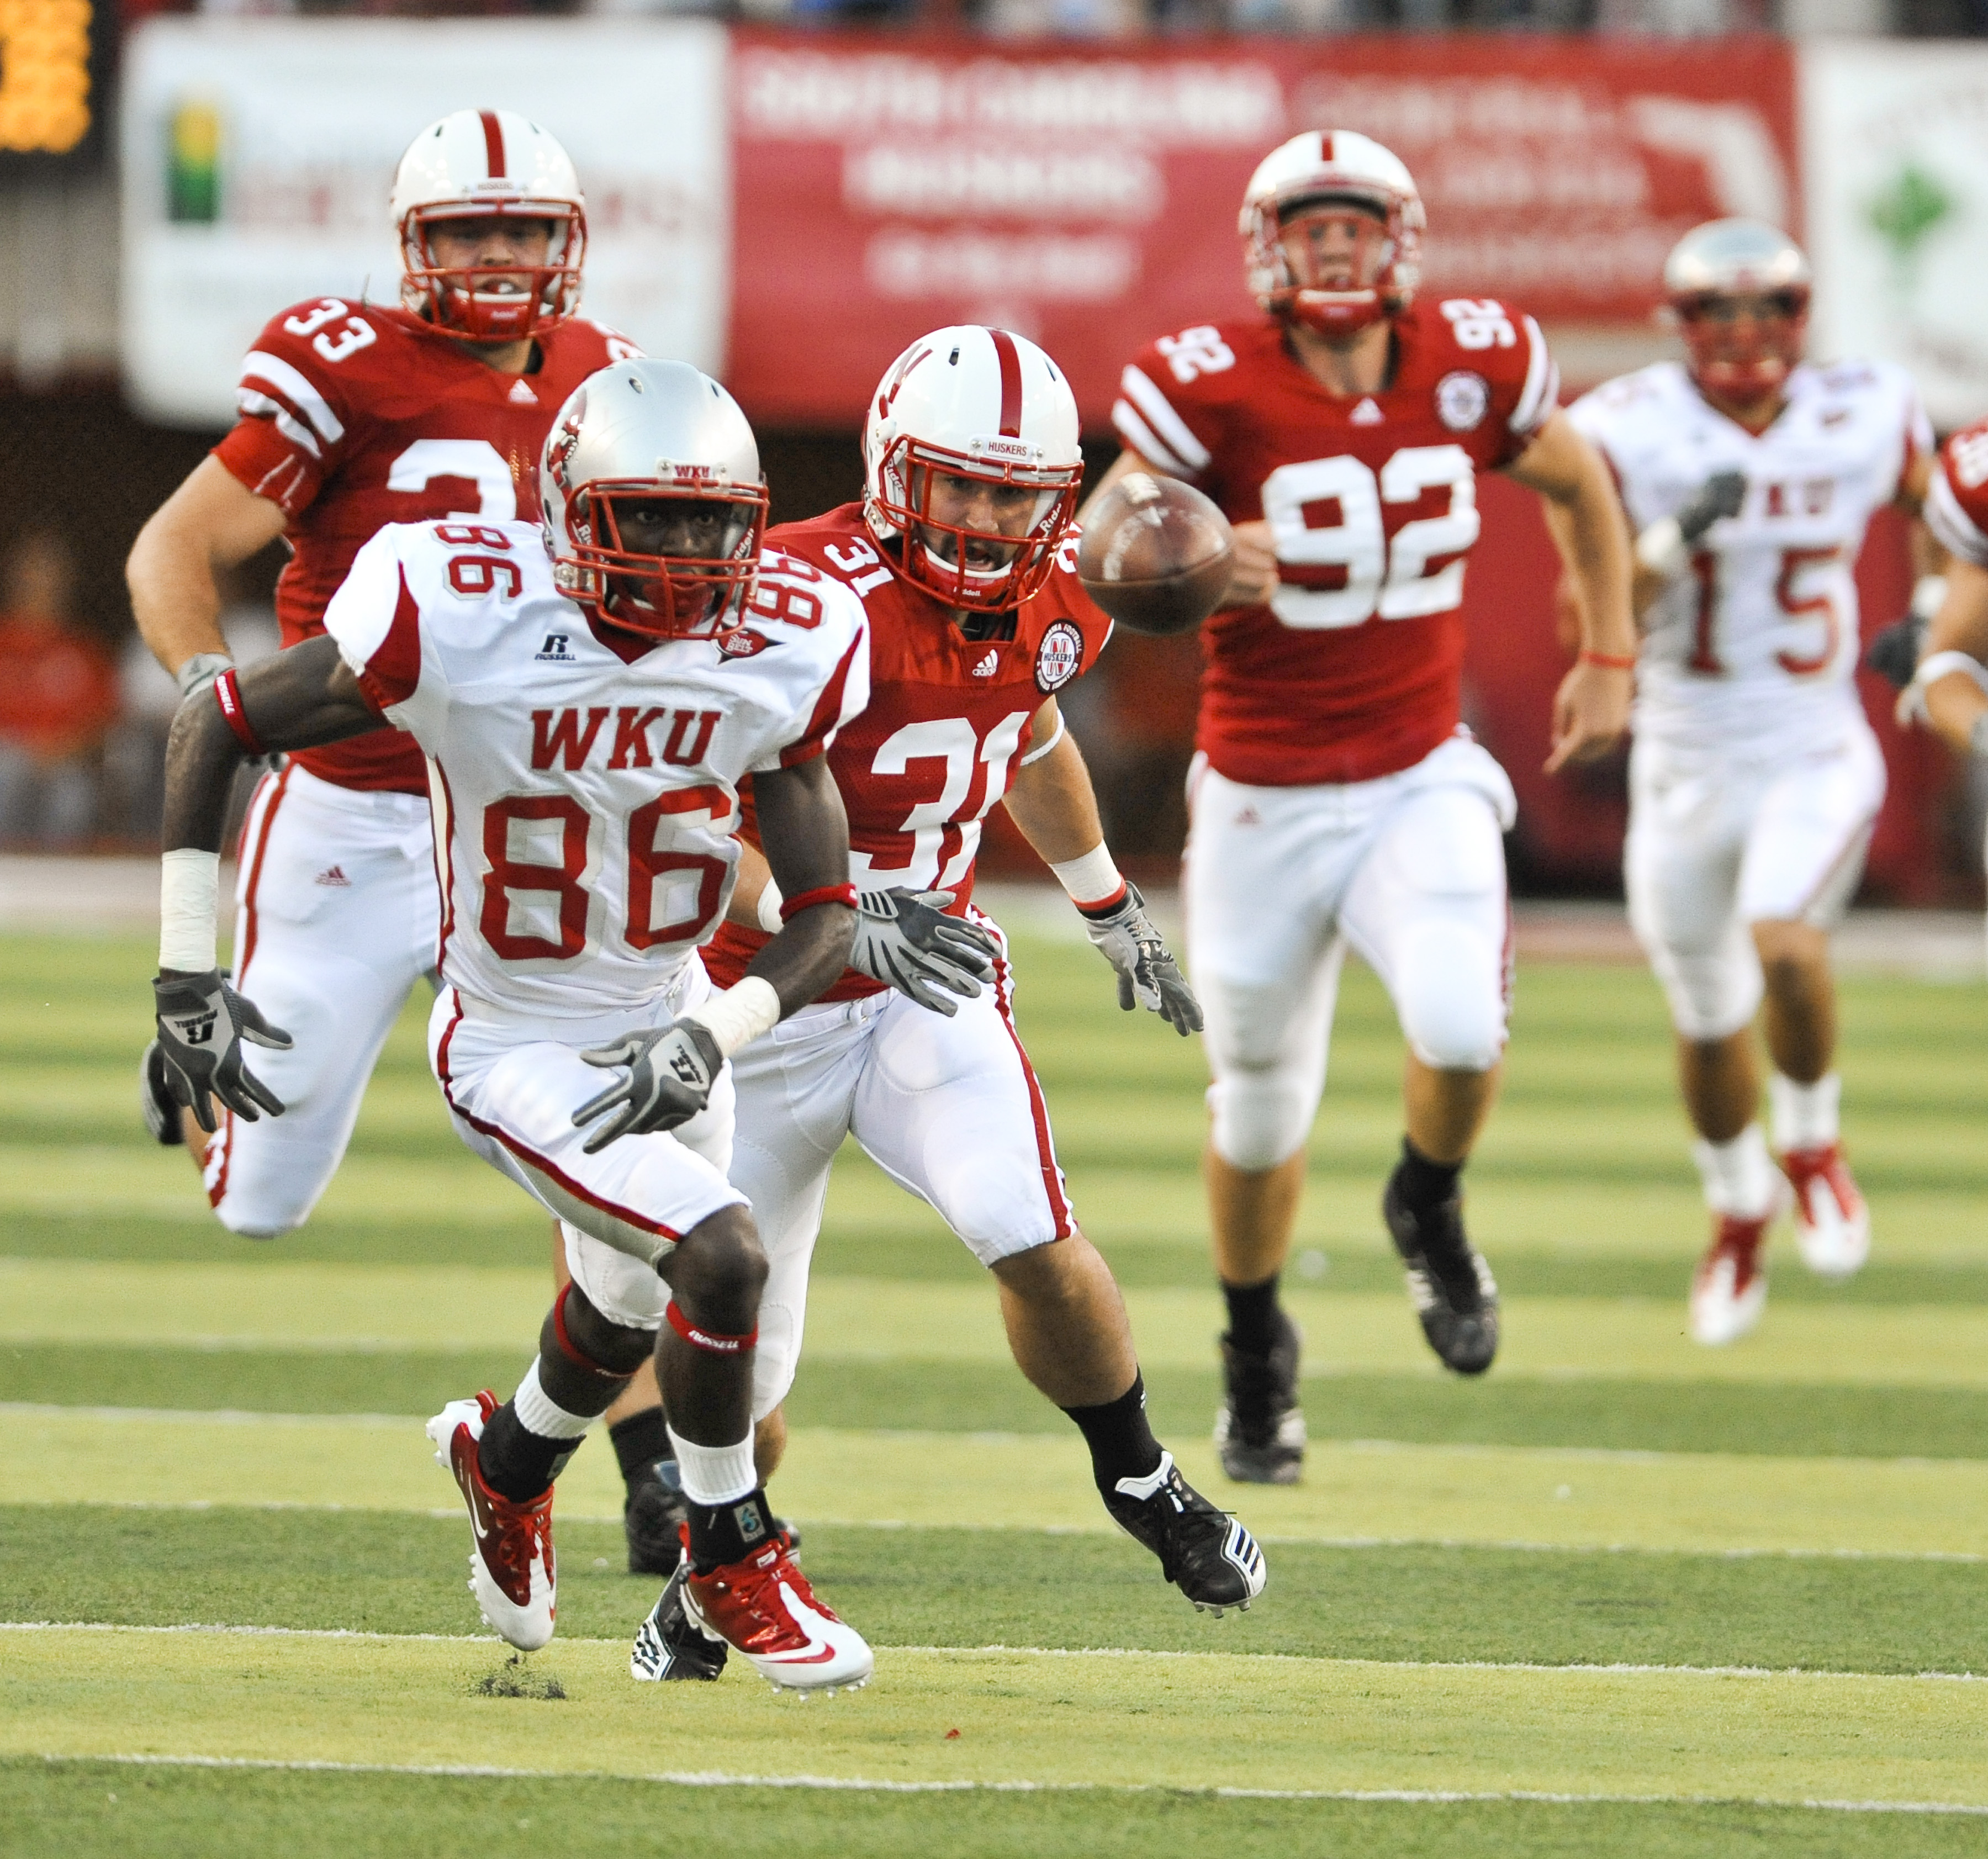 LINCOLN, NE - SEPTEMBER 04: Willie McNeal of the Western Kentucky Hilltoppers and Jase Dean #31 of the Nebraska Cornhuskers run after a mishandled punt during first half action of their game at Memorial Stadium on September 4, 2010 in Lincoln, Nebraska. N